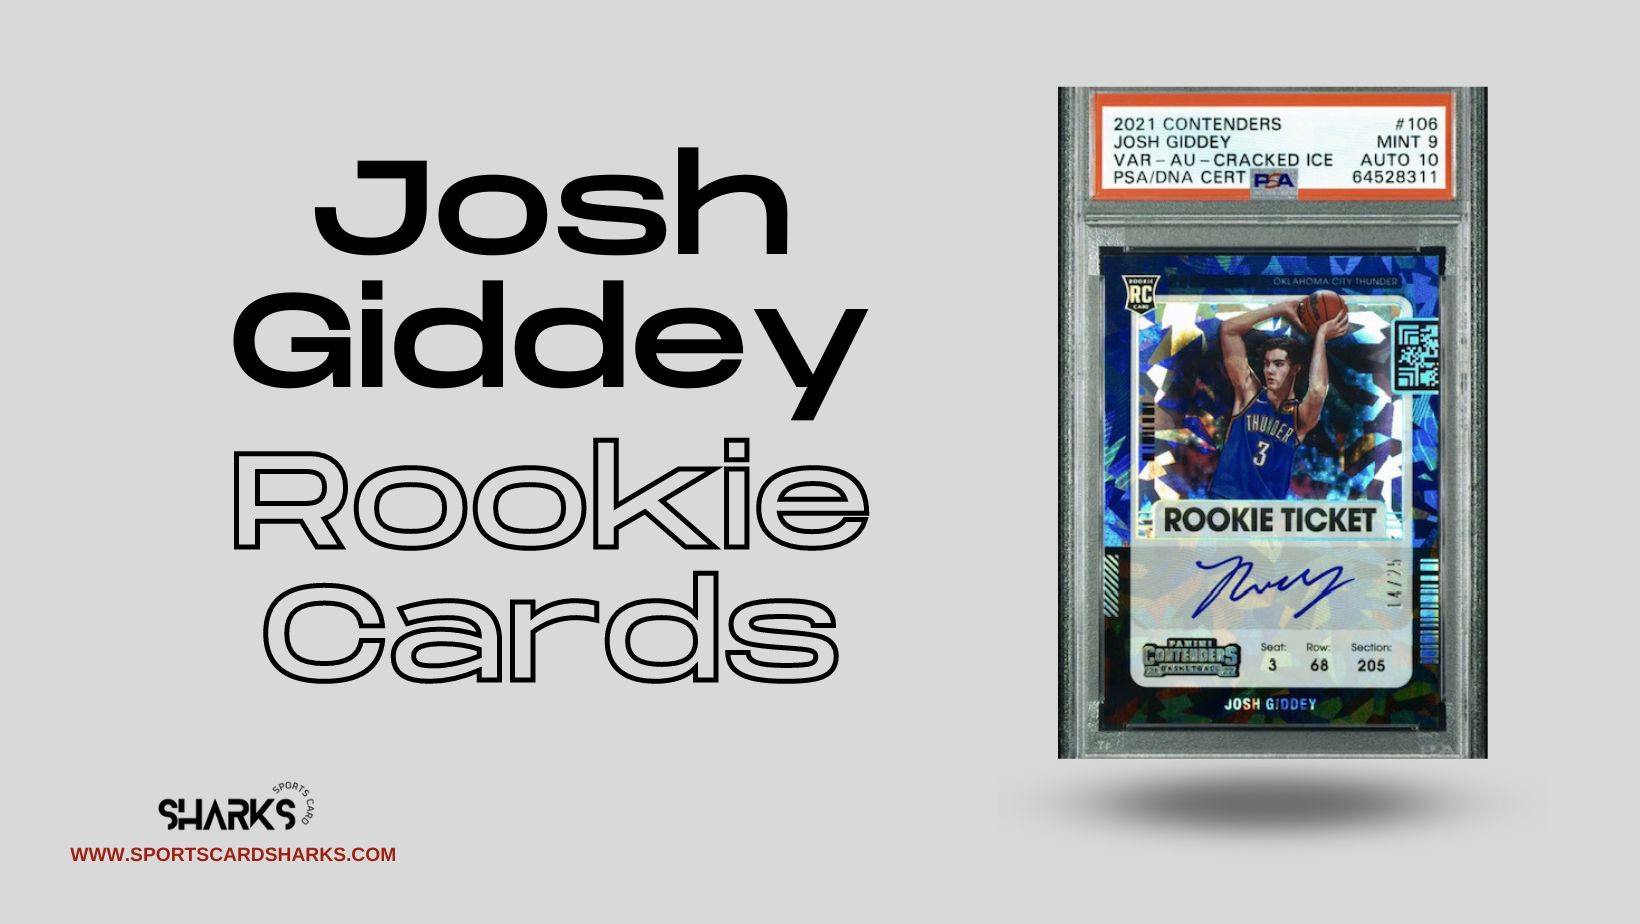 Featured image for the Best Josh Giddey Rookie Cards blog post on Sports Card Sharks